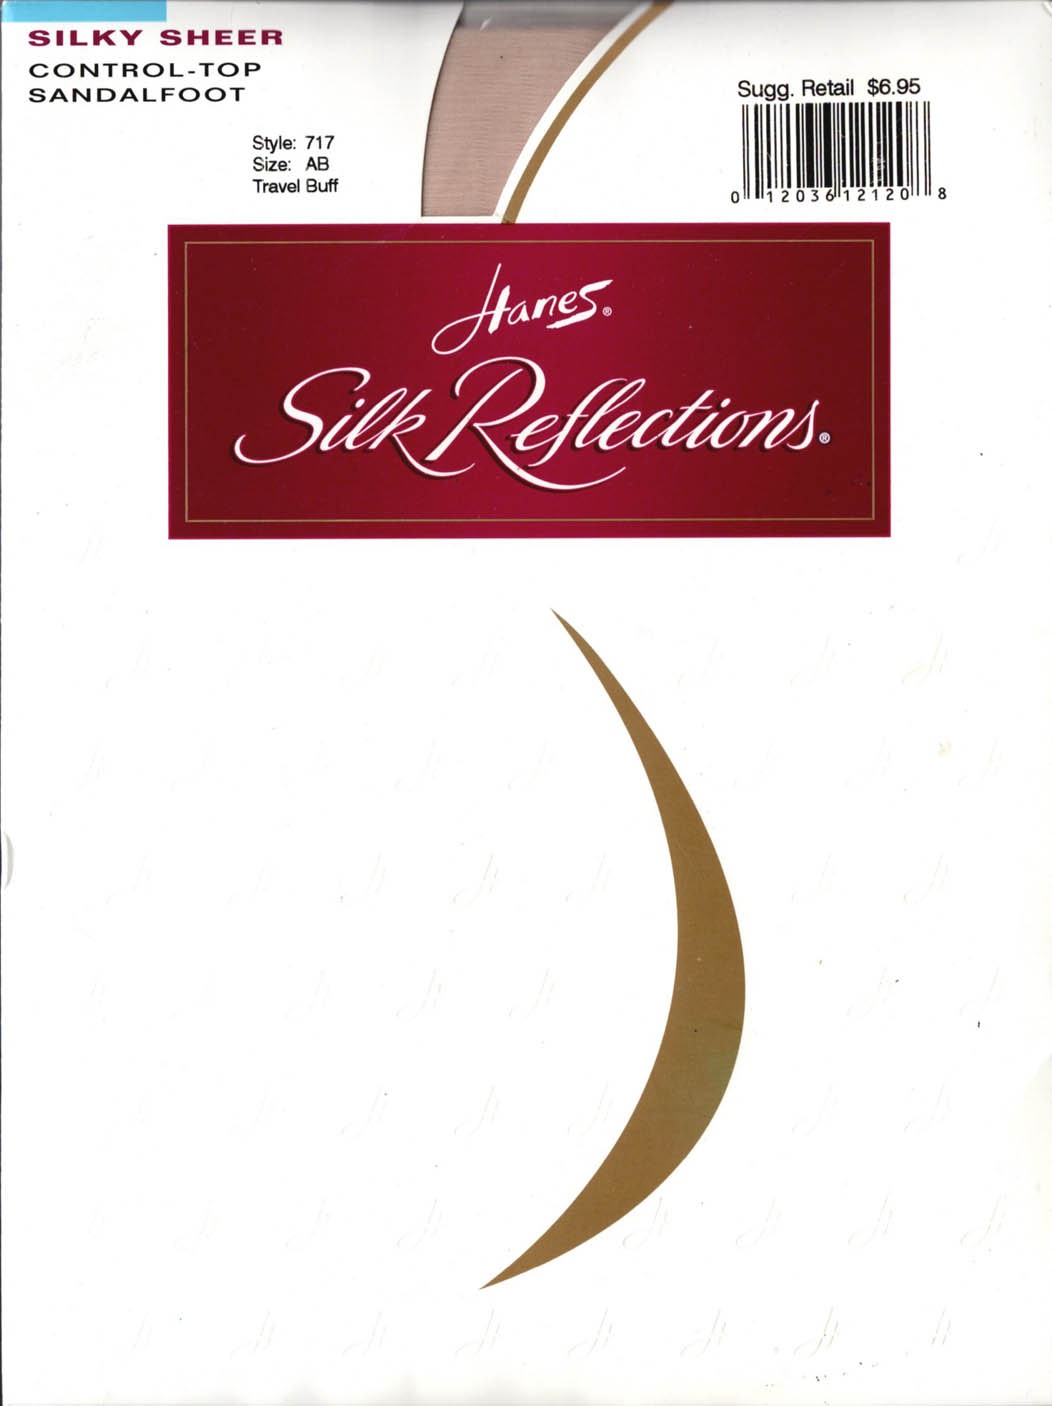 Hanes SILK REFLECTIONS CONTROL TOP, SANDALFOOT - 717 AB